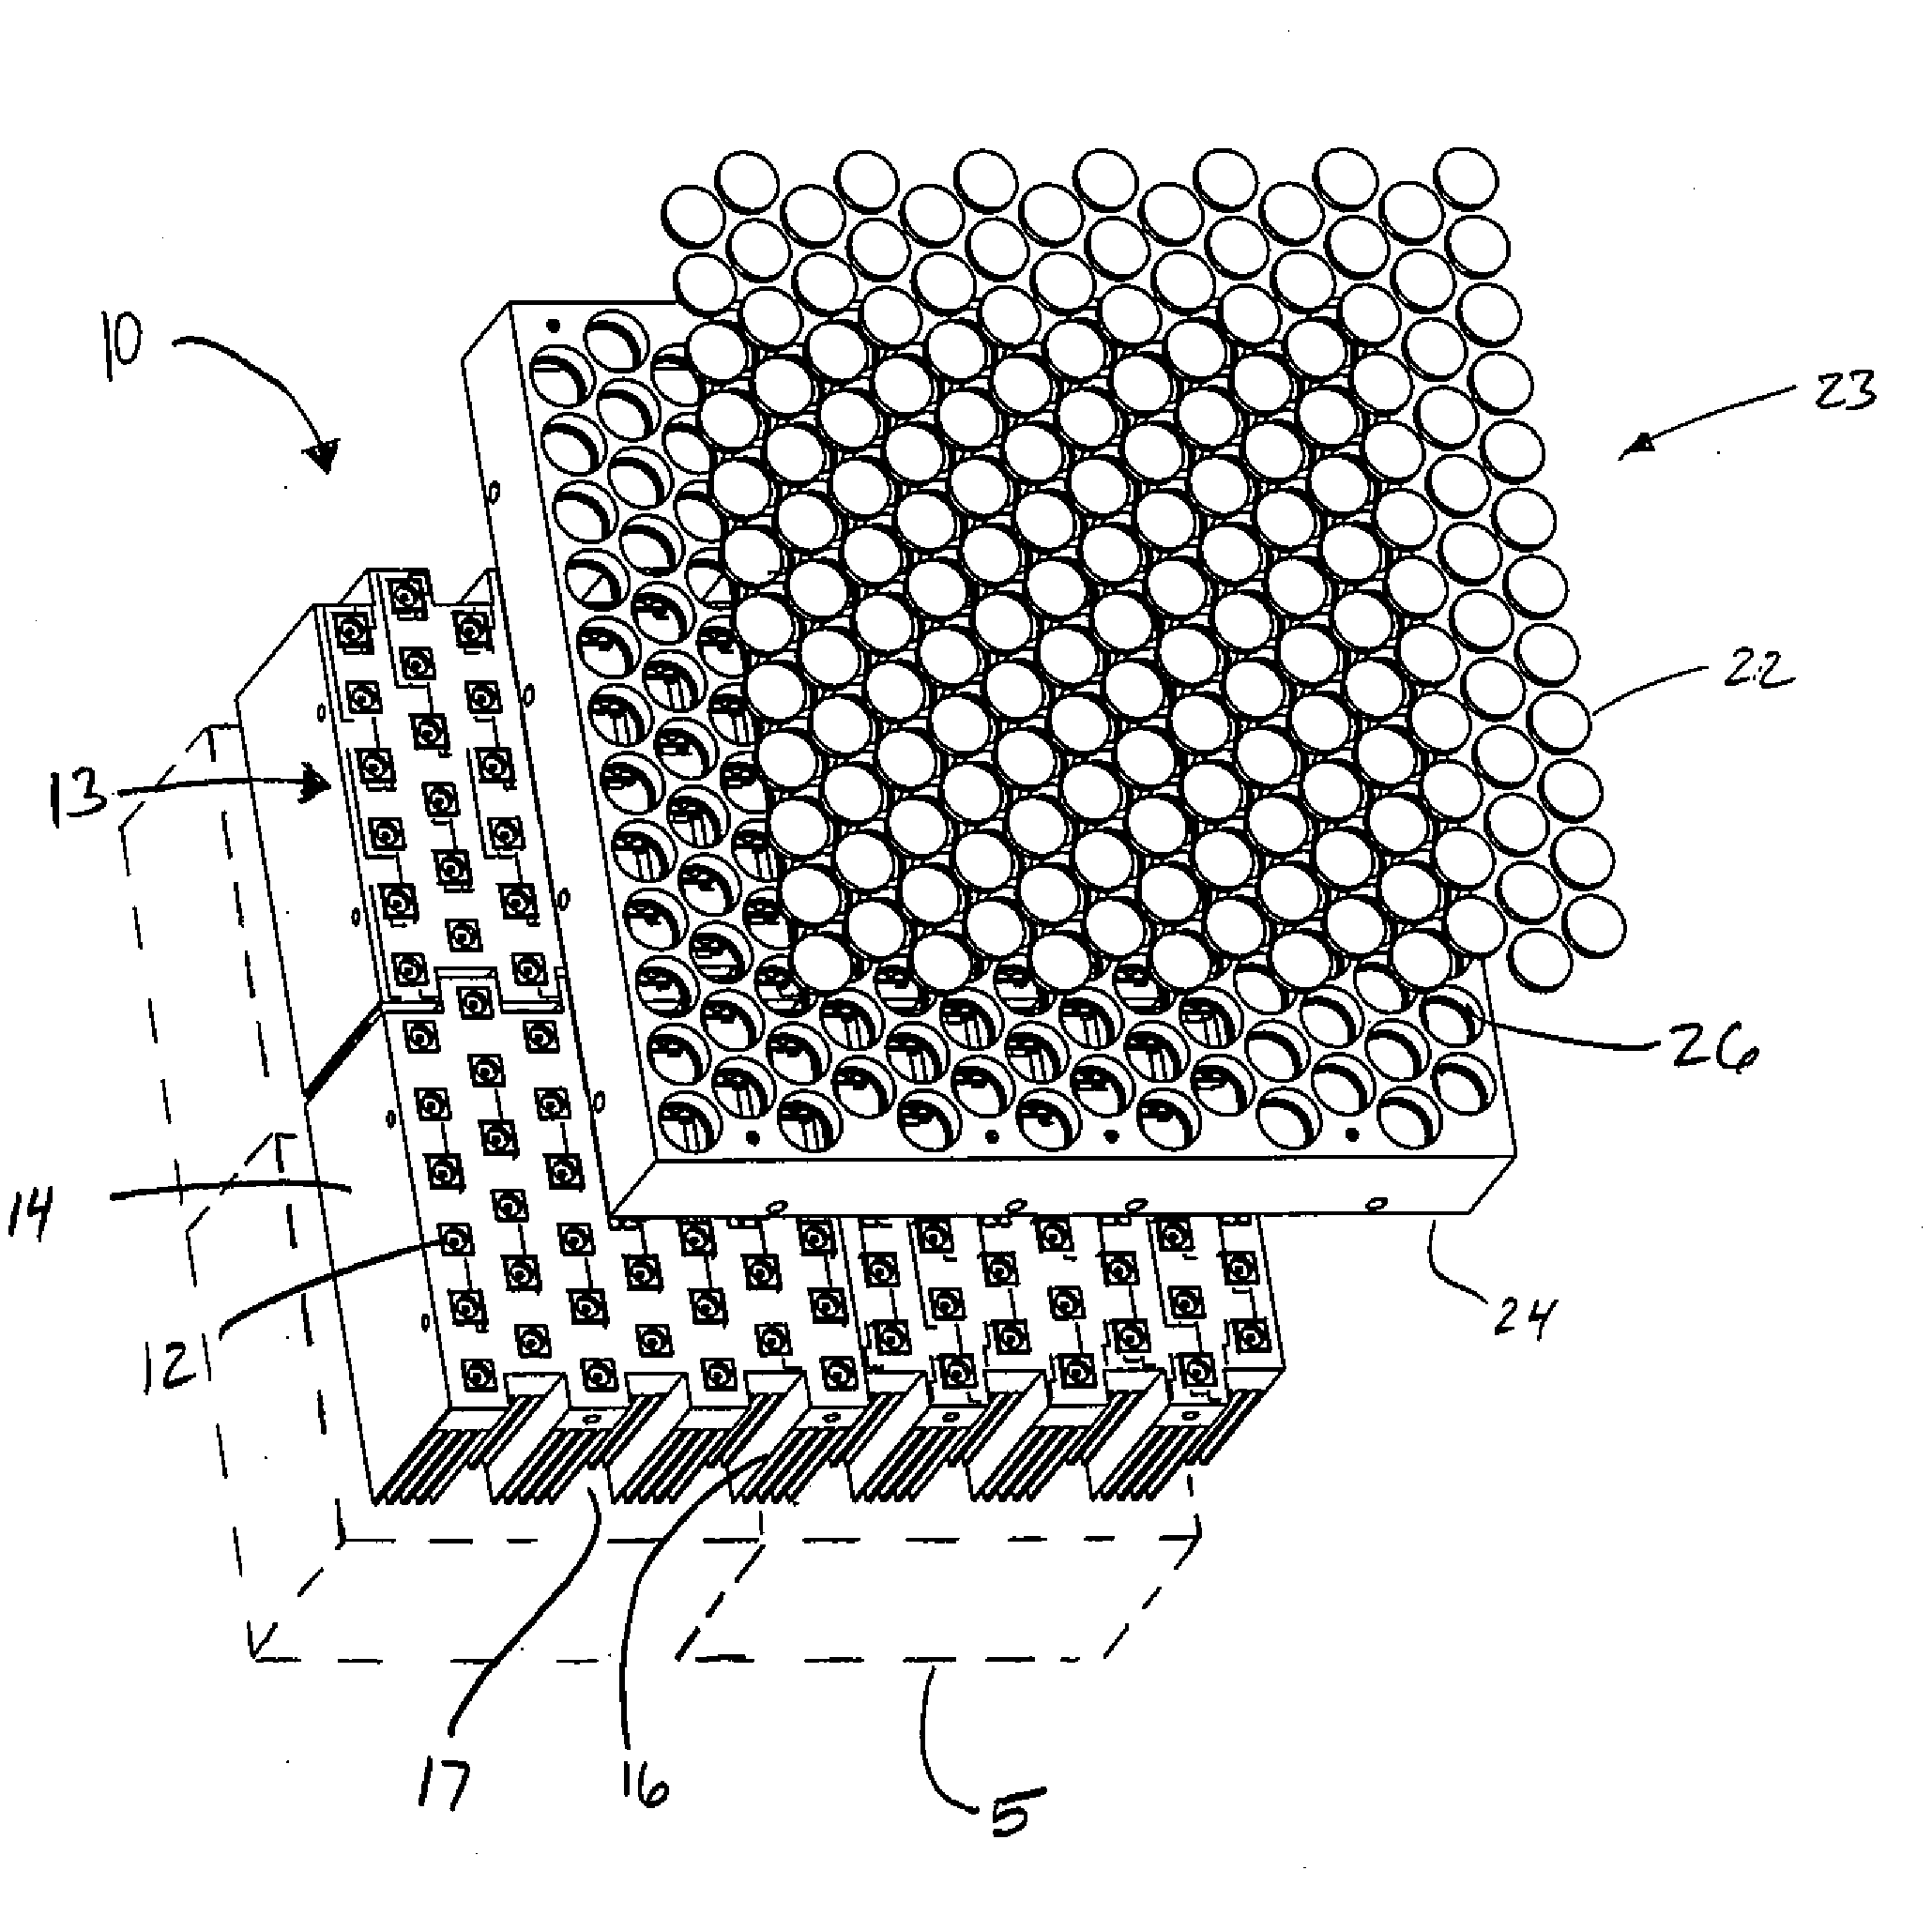 Ultraviolet light-emitting diode exposure apparatus for microfabrication